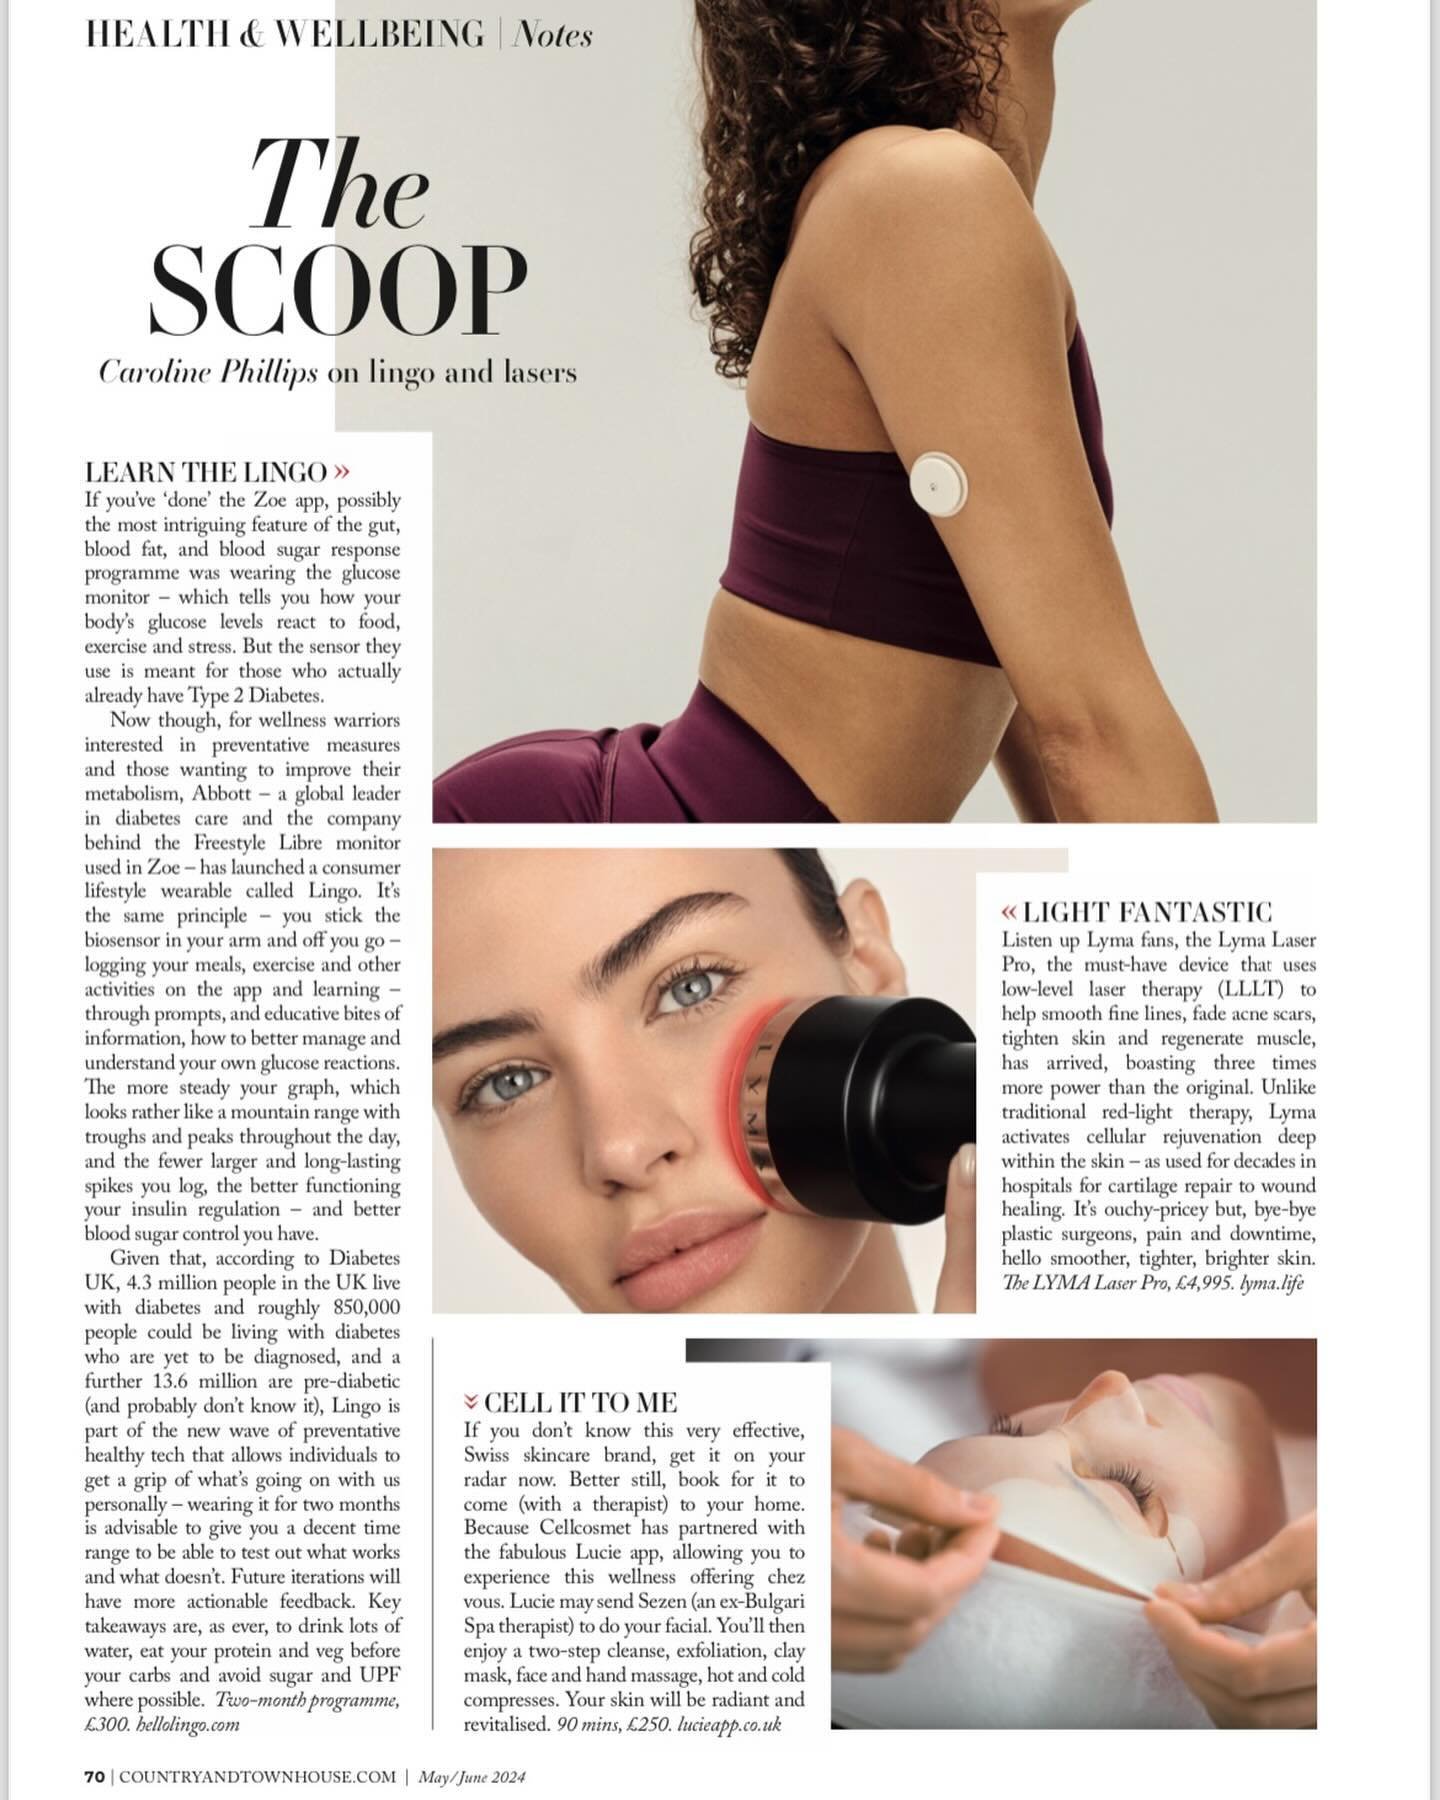 Get the scoop on our partnership with @cellcosmet_official in this month&rsquo;s @countryandtownhouse and book their amazing facials via the @lucie.app. Cellcosmet facials now available in London and The Cotswolds.

#LucieAtHome #LuciePress